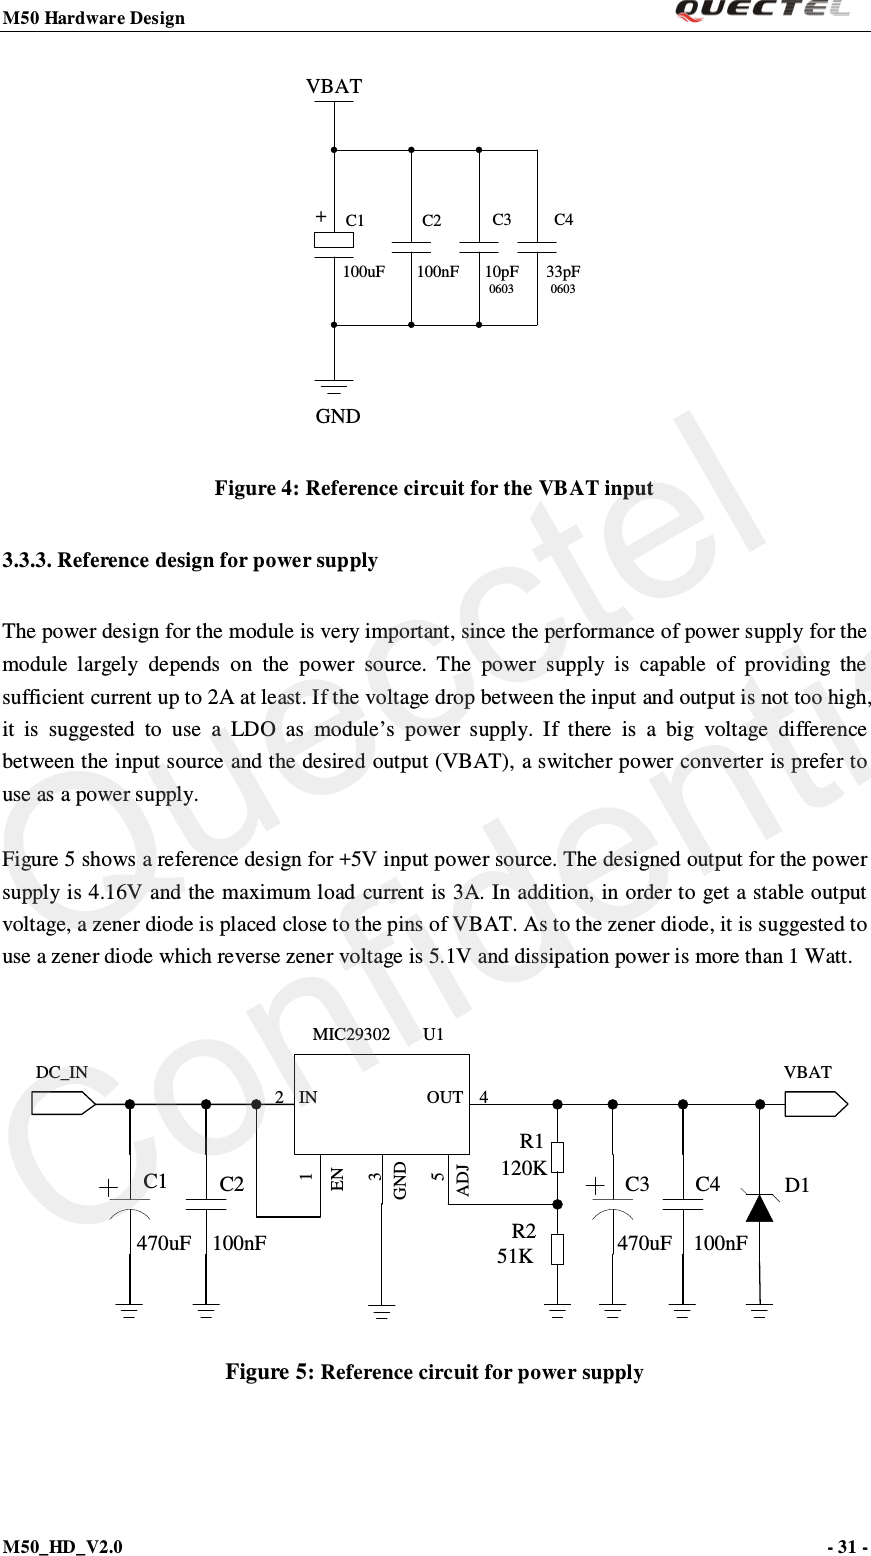 M50 Hardware Design                                                                M50_HD_V2.0                                                                      - 31 -   VBATC2C1+C3 C4GND100uF 100nF 10pF060333pF0603 Figure 4: Reference circuit for the VBAT input 3.3.3. Reference design for power supply The power design for the module is very important, since the performance of power supply for the module largely depends on the power source. The power supply is capable of providing the sufficient current up to 2A at least. If the voltage drop between the input and output is not too high, it is suggested to use a LDO as module’s power supply. If there is a big voltage difference between the input source and the desired output (VBAT), a switcher power converter is prefer to use as a power supply.  Figure 5 shows a reference design for +5V input power source. The designed output for the power supply is 4.16V and the maximum load current is 3A. In addition, in order to get a stable output voltage, a zener diode is placed close to the pins of VBAT. As to the zener diode, it is suggested to use a zener diode which reverse zener voltage is 5.1V and dissipation power is more than 1 Watt.  DC_INC1 C2MIC29302 U1IN OUTENGNDADJ2 4135VBAT100nFC3470uFC4100nFR1D1120K51KR2470uF Figure 5: Reference circuit for power supply Quecctel Confidential